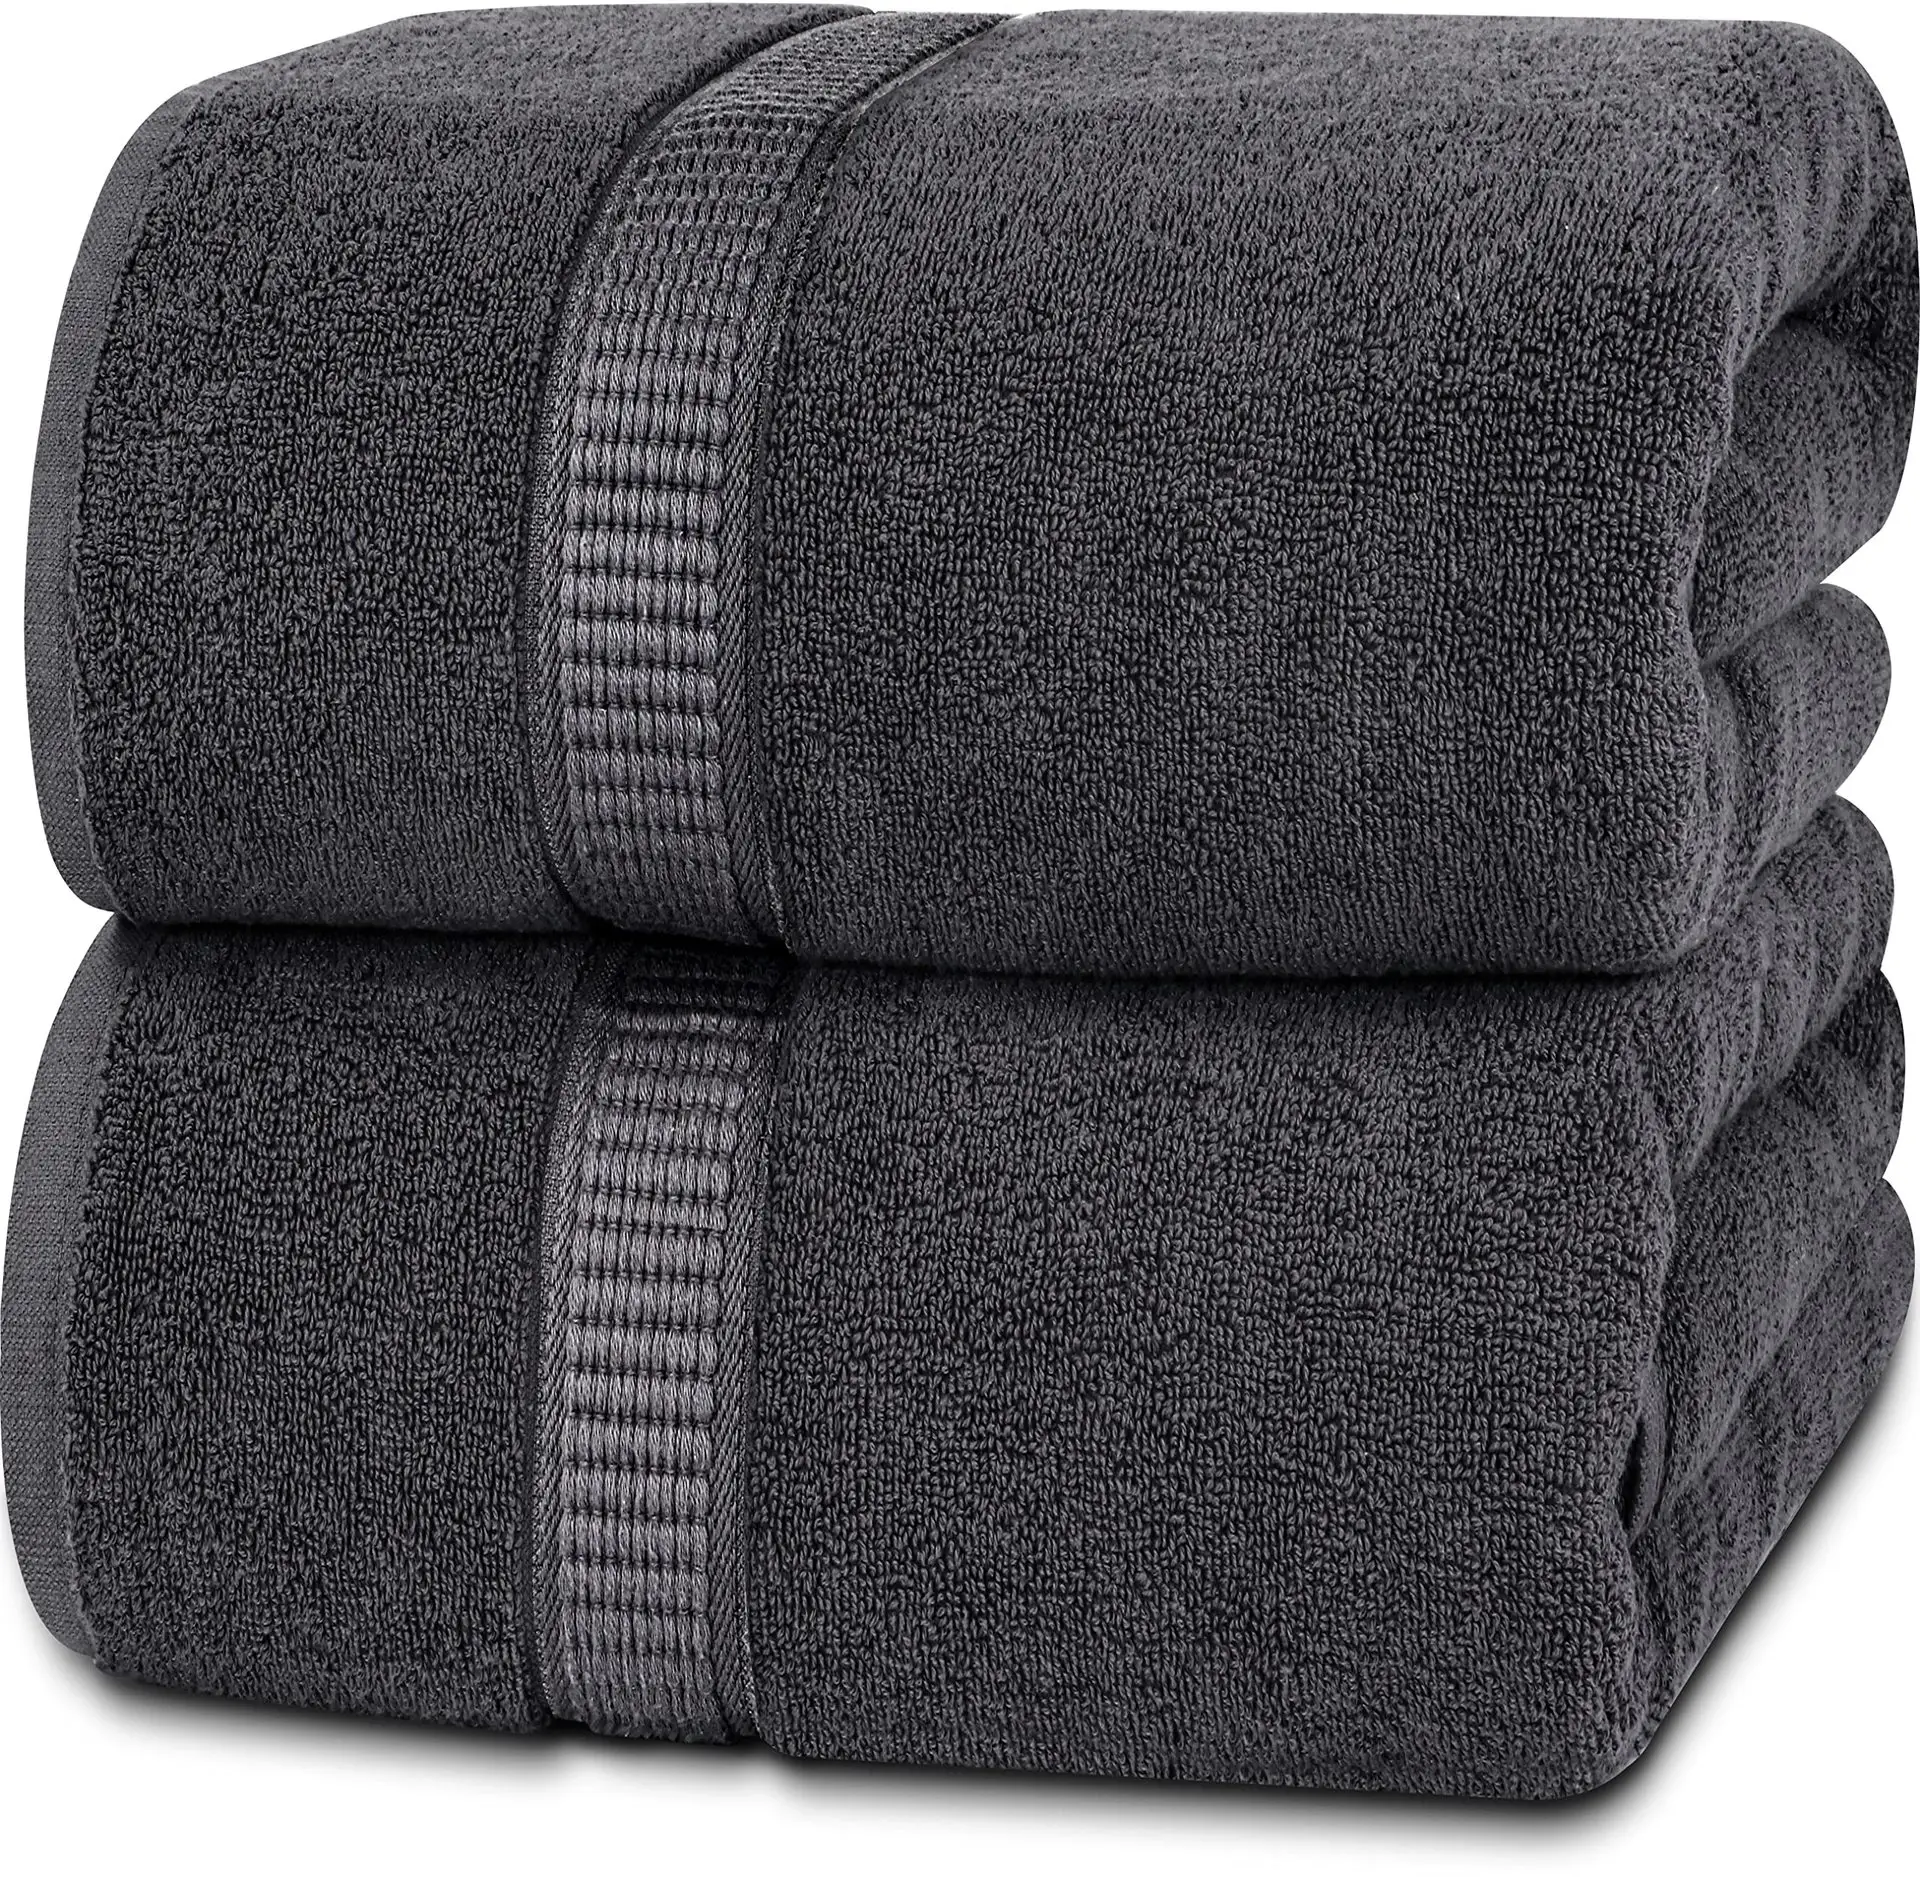 Luxury large 600GSM70 * 150cm high-quality quick drying soft hotel oversized bath towel